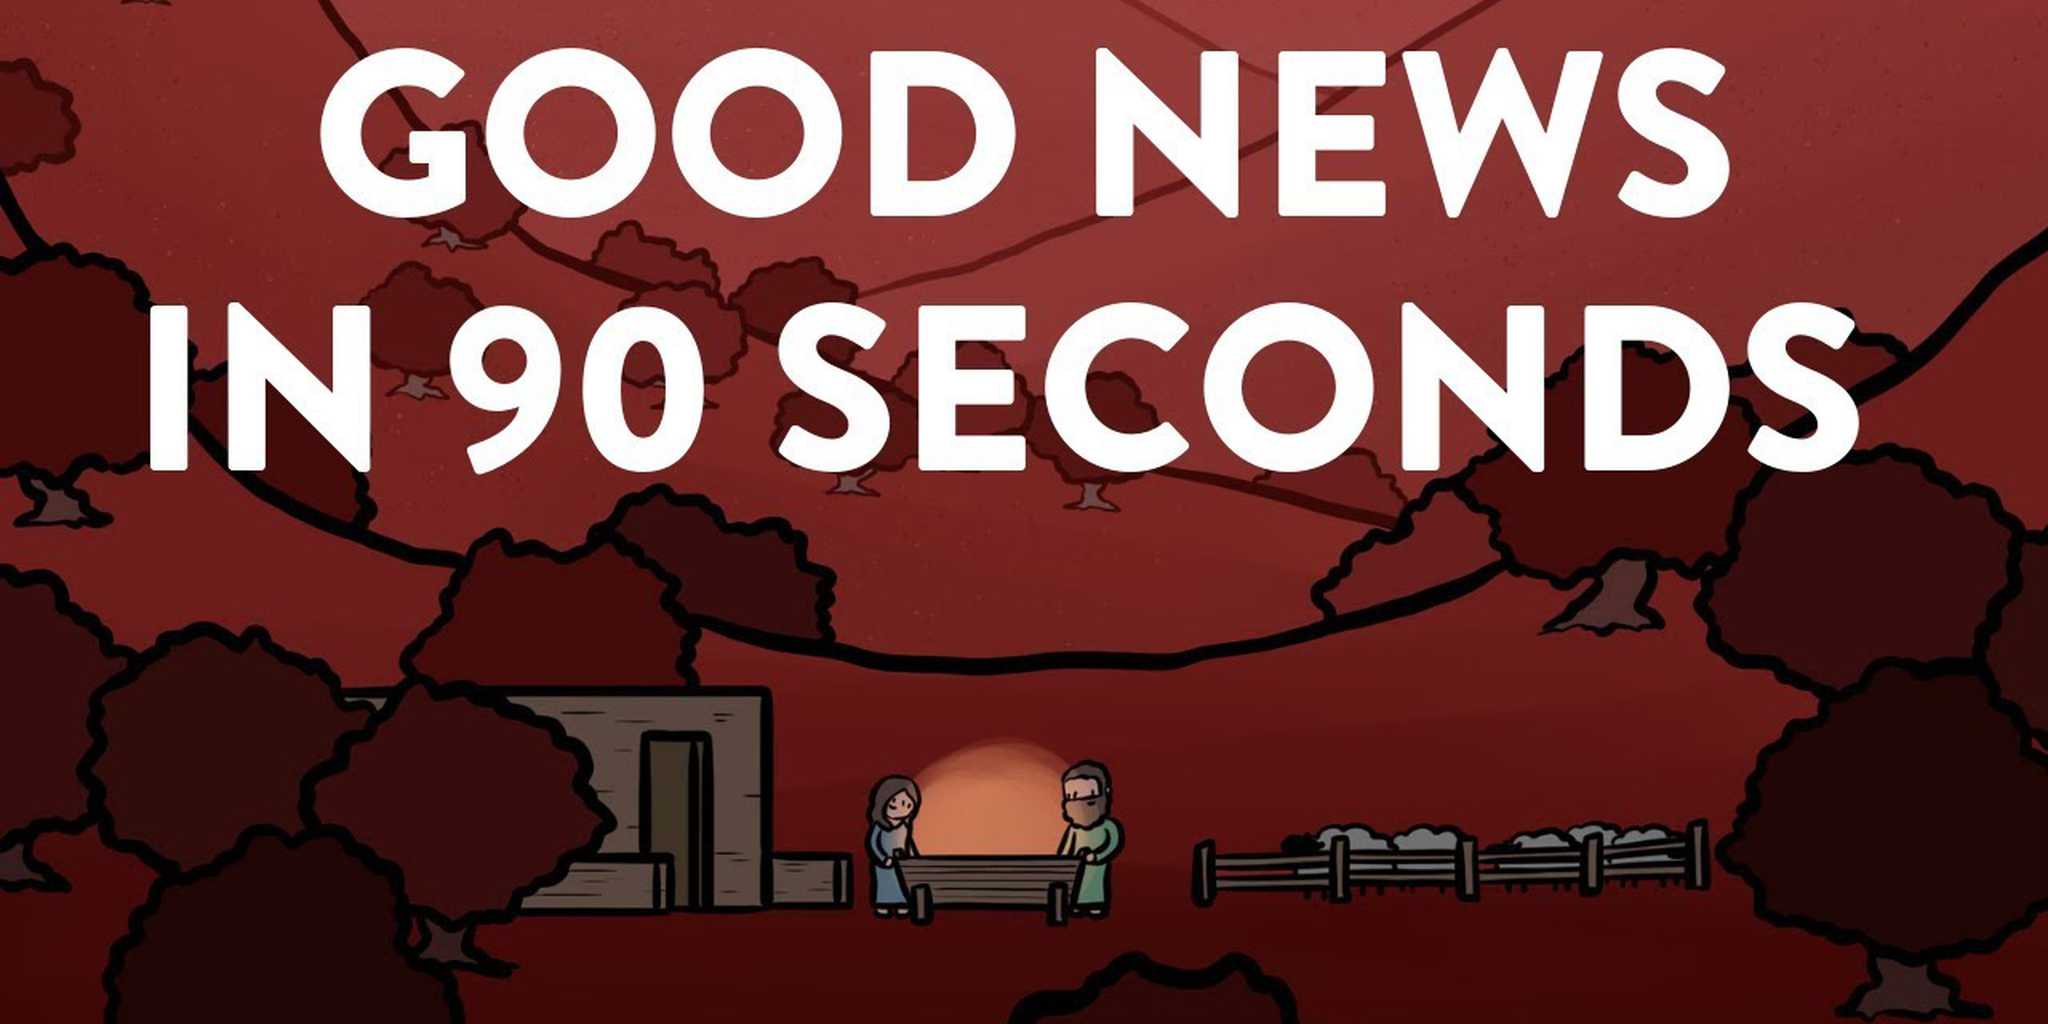 The Good News in 90 Seconds